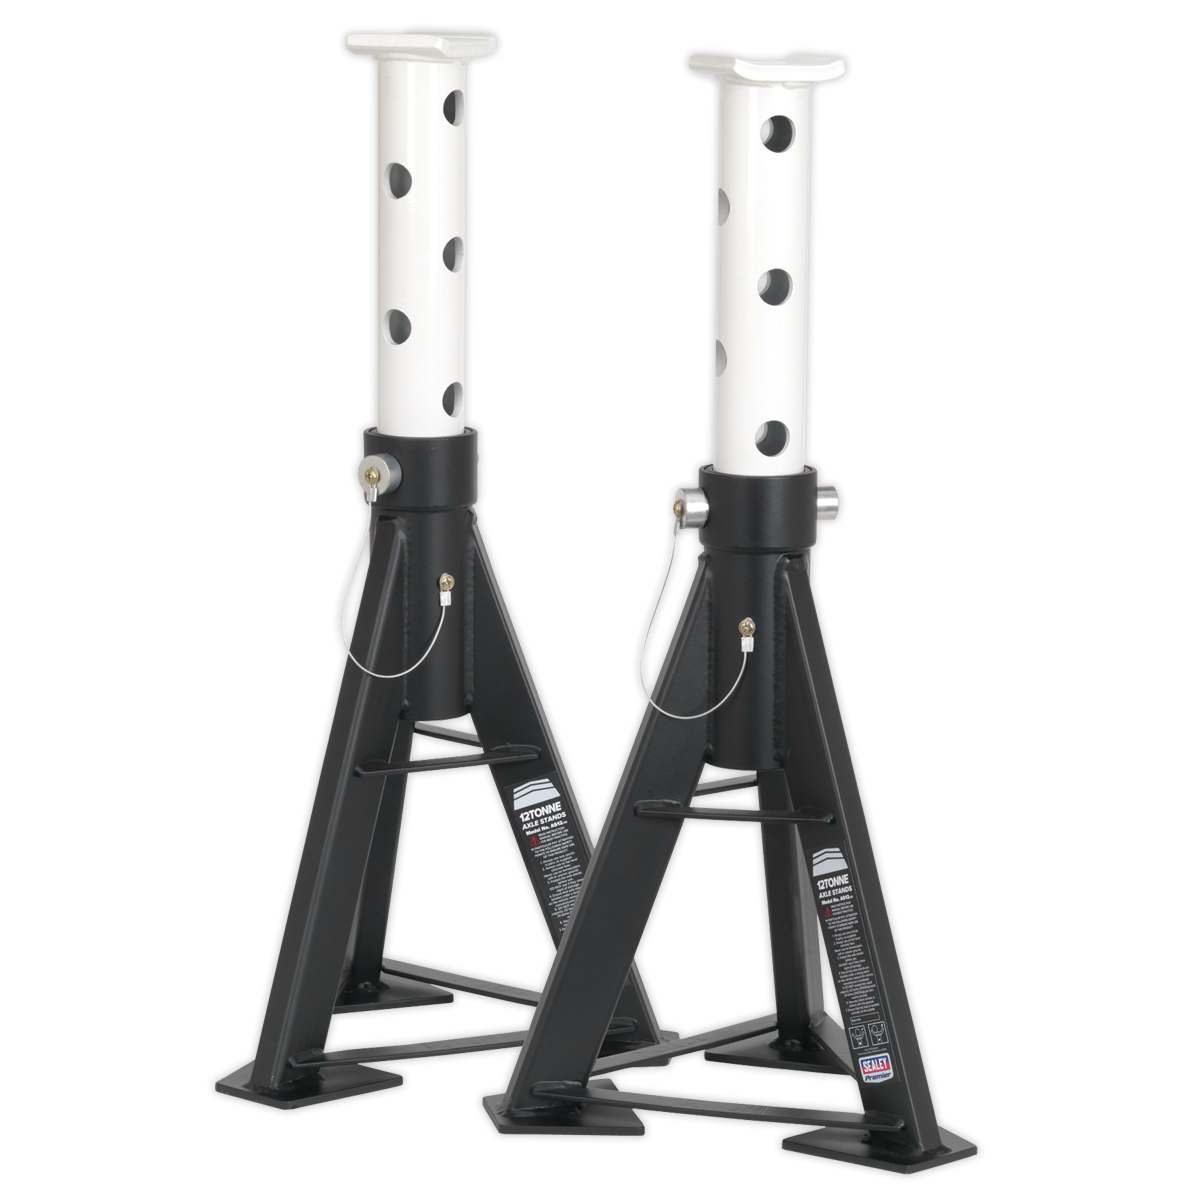 Axle Stands (Pair) 12 Tonne Capacity per Stand - AS12 - Farming Parts